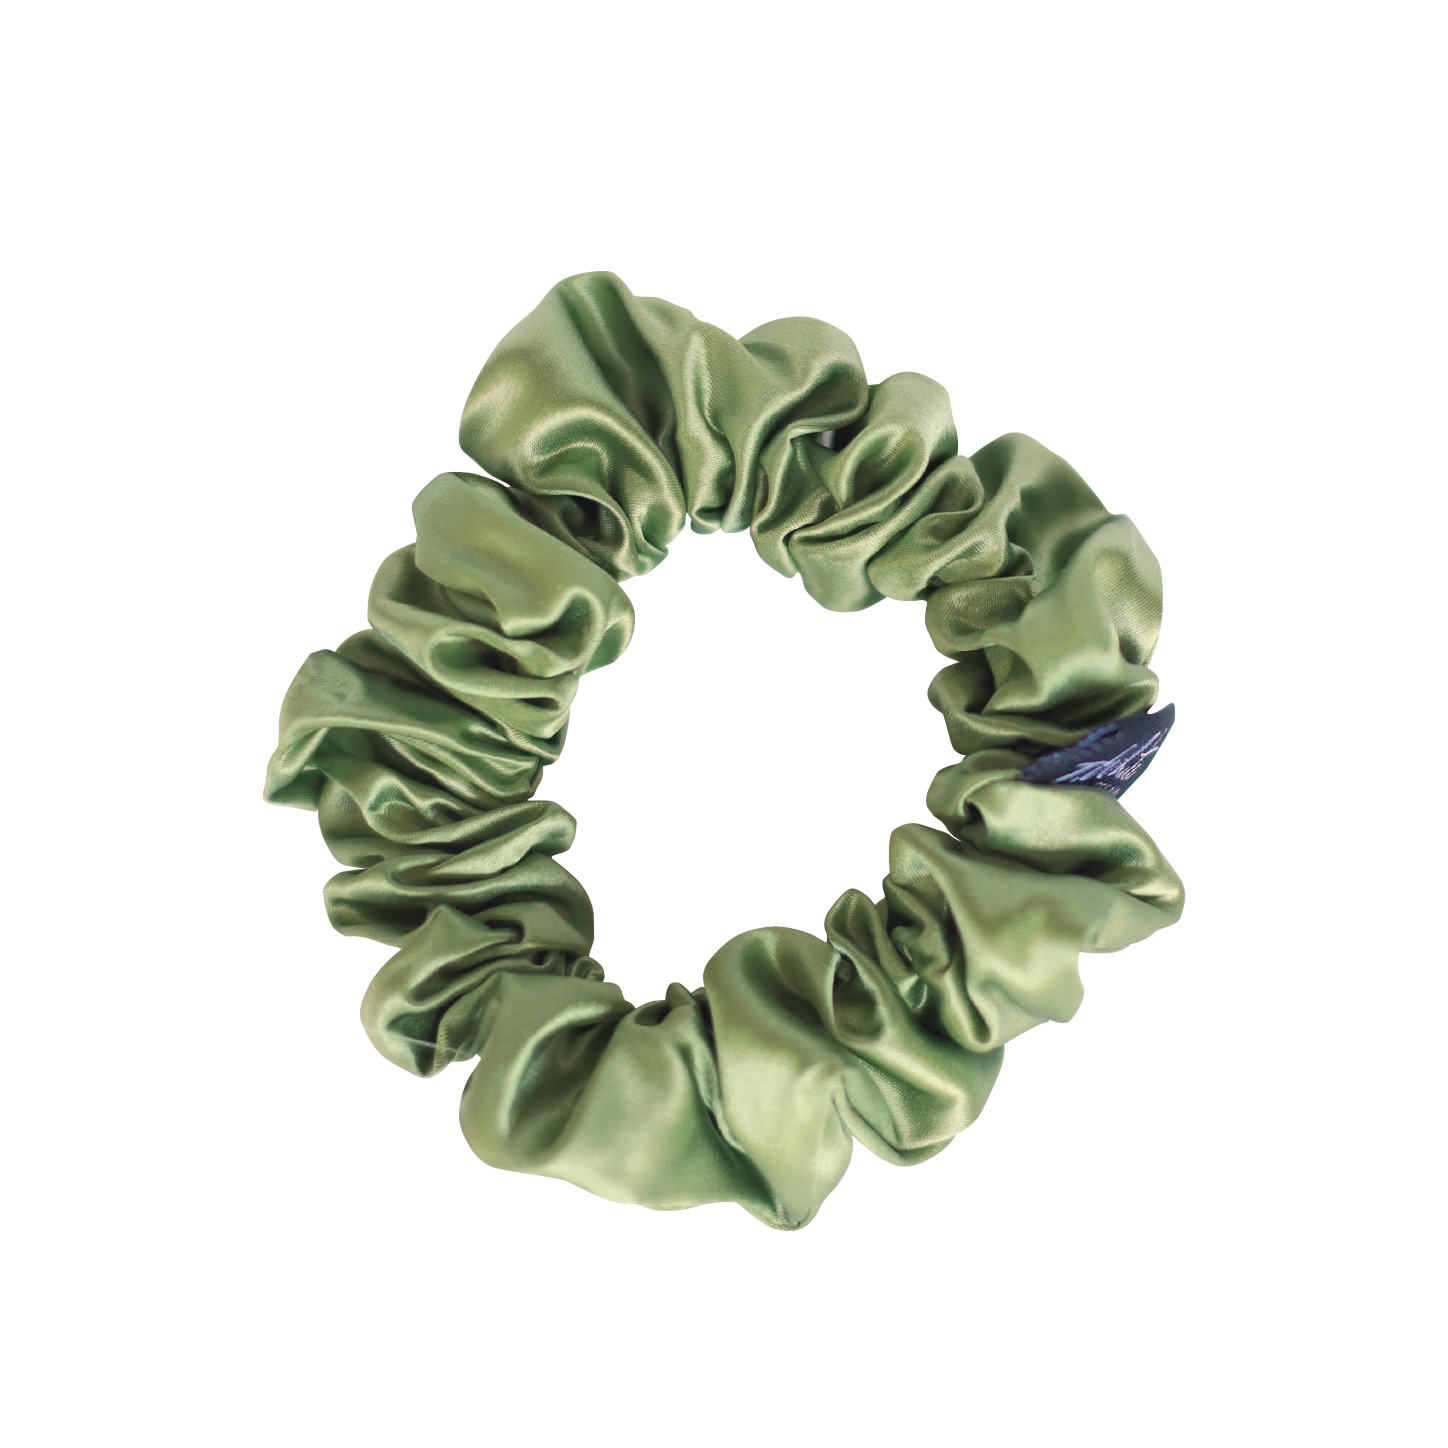 Mulberry silk is 100 percent natural. Our beautiful mulberry silk scrunchies glide over hair in a loving embrace that eliminates frizz, wrinkles, and knots while reducing hair damage. Say goodbye to breakage and welcome to healthy hair when worn on a daily basis.